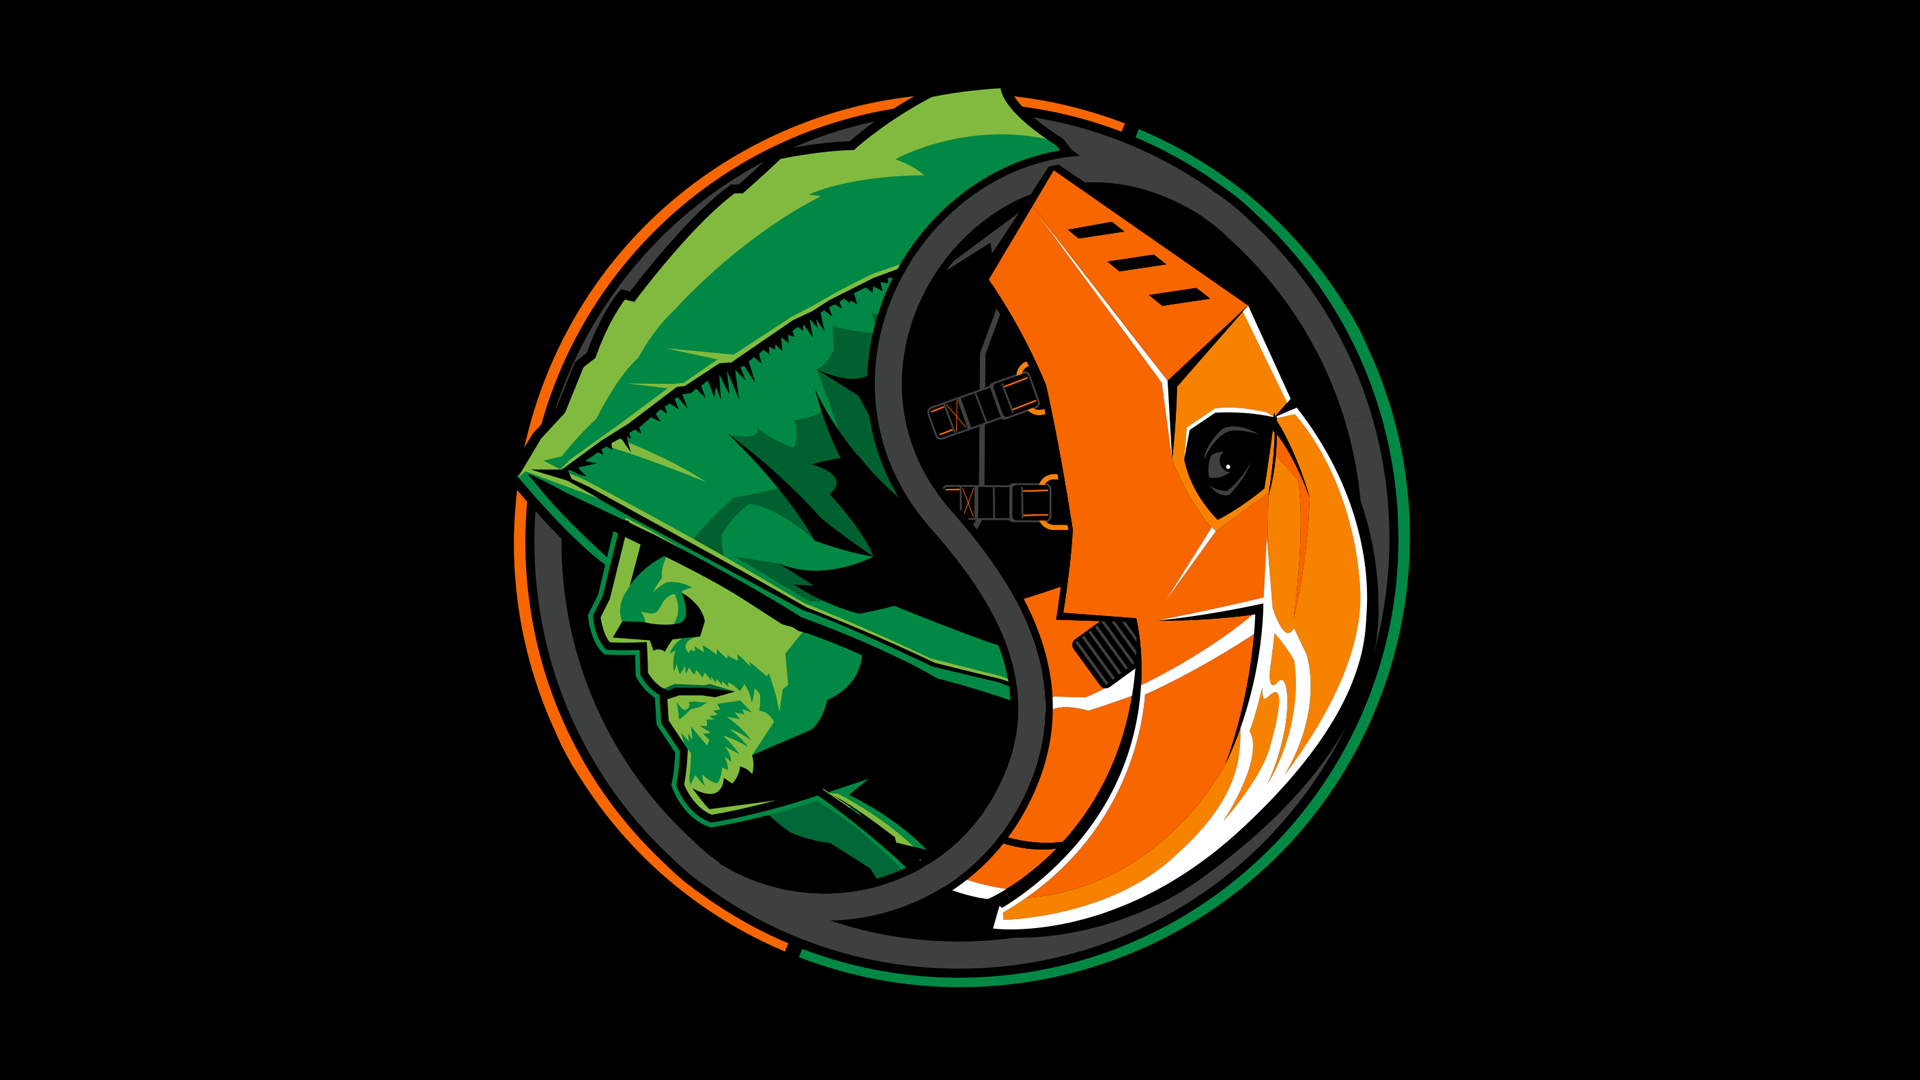 Arrow Vs Slade Yin Yang Design Wallpaper Image Oc Submitted To